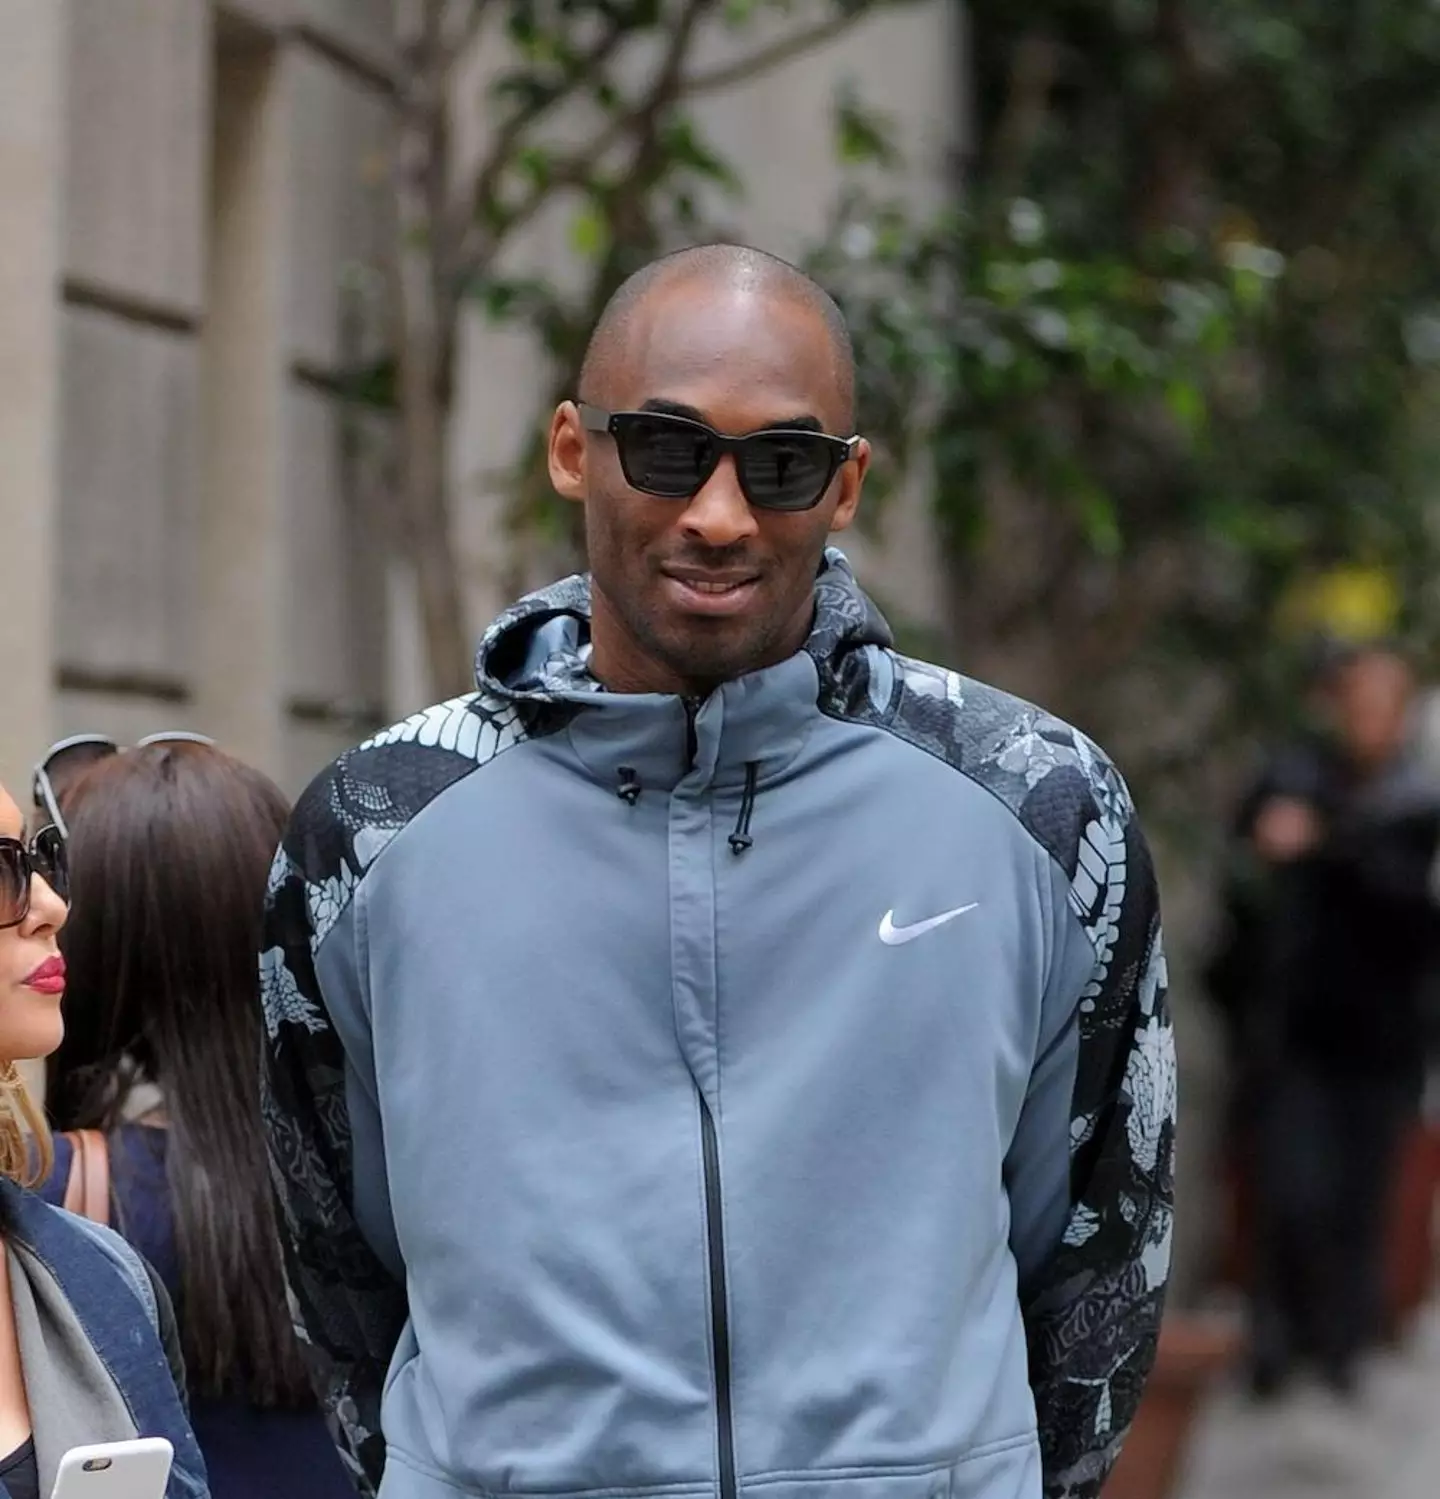 Kobe Bryant tragically died in a helicopter crash alongside his 13-year-old daughter last year.